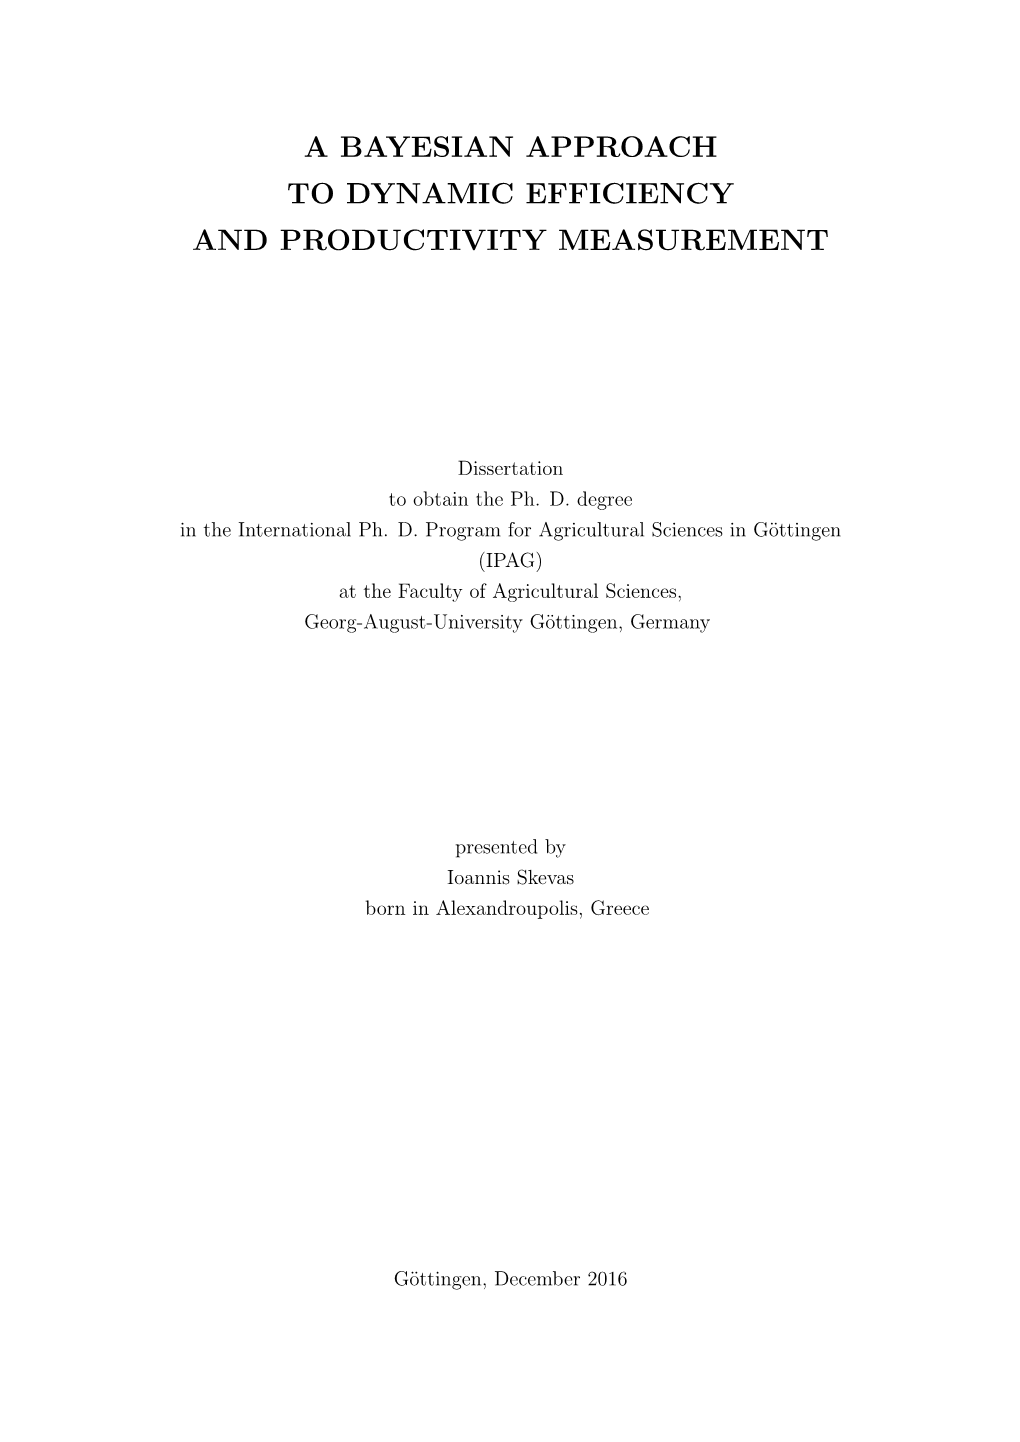 A Bayesian Approach to Dynamic Efficiency and Productivity Measurement